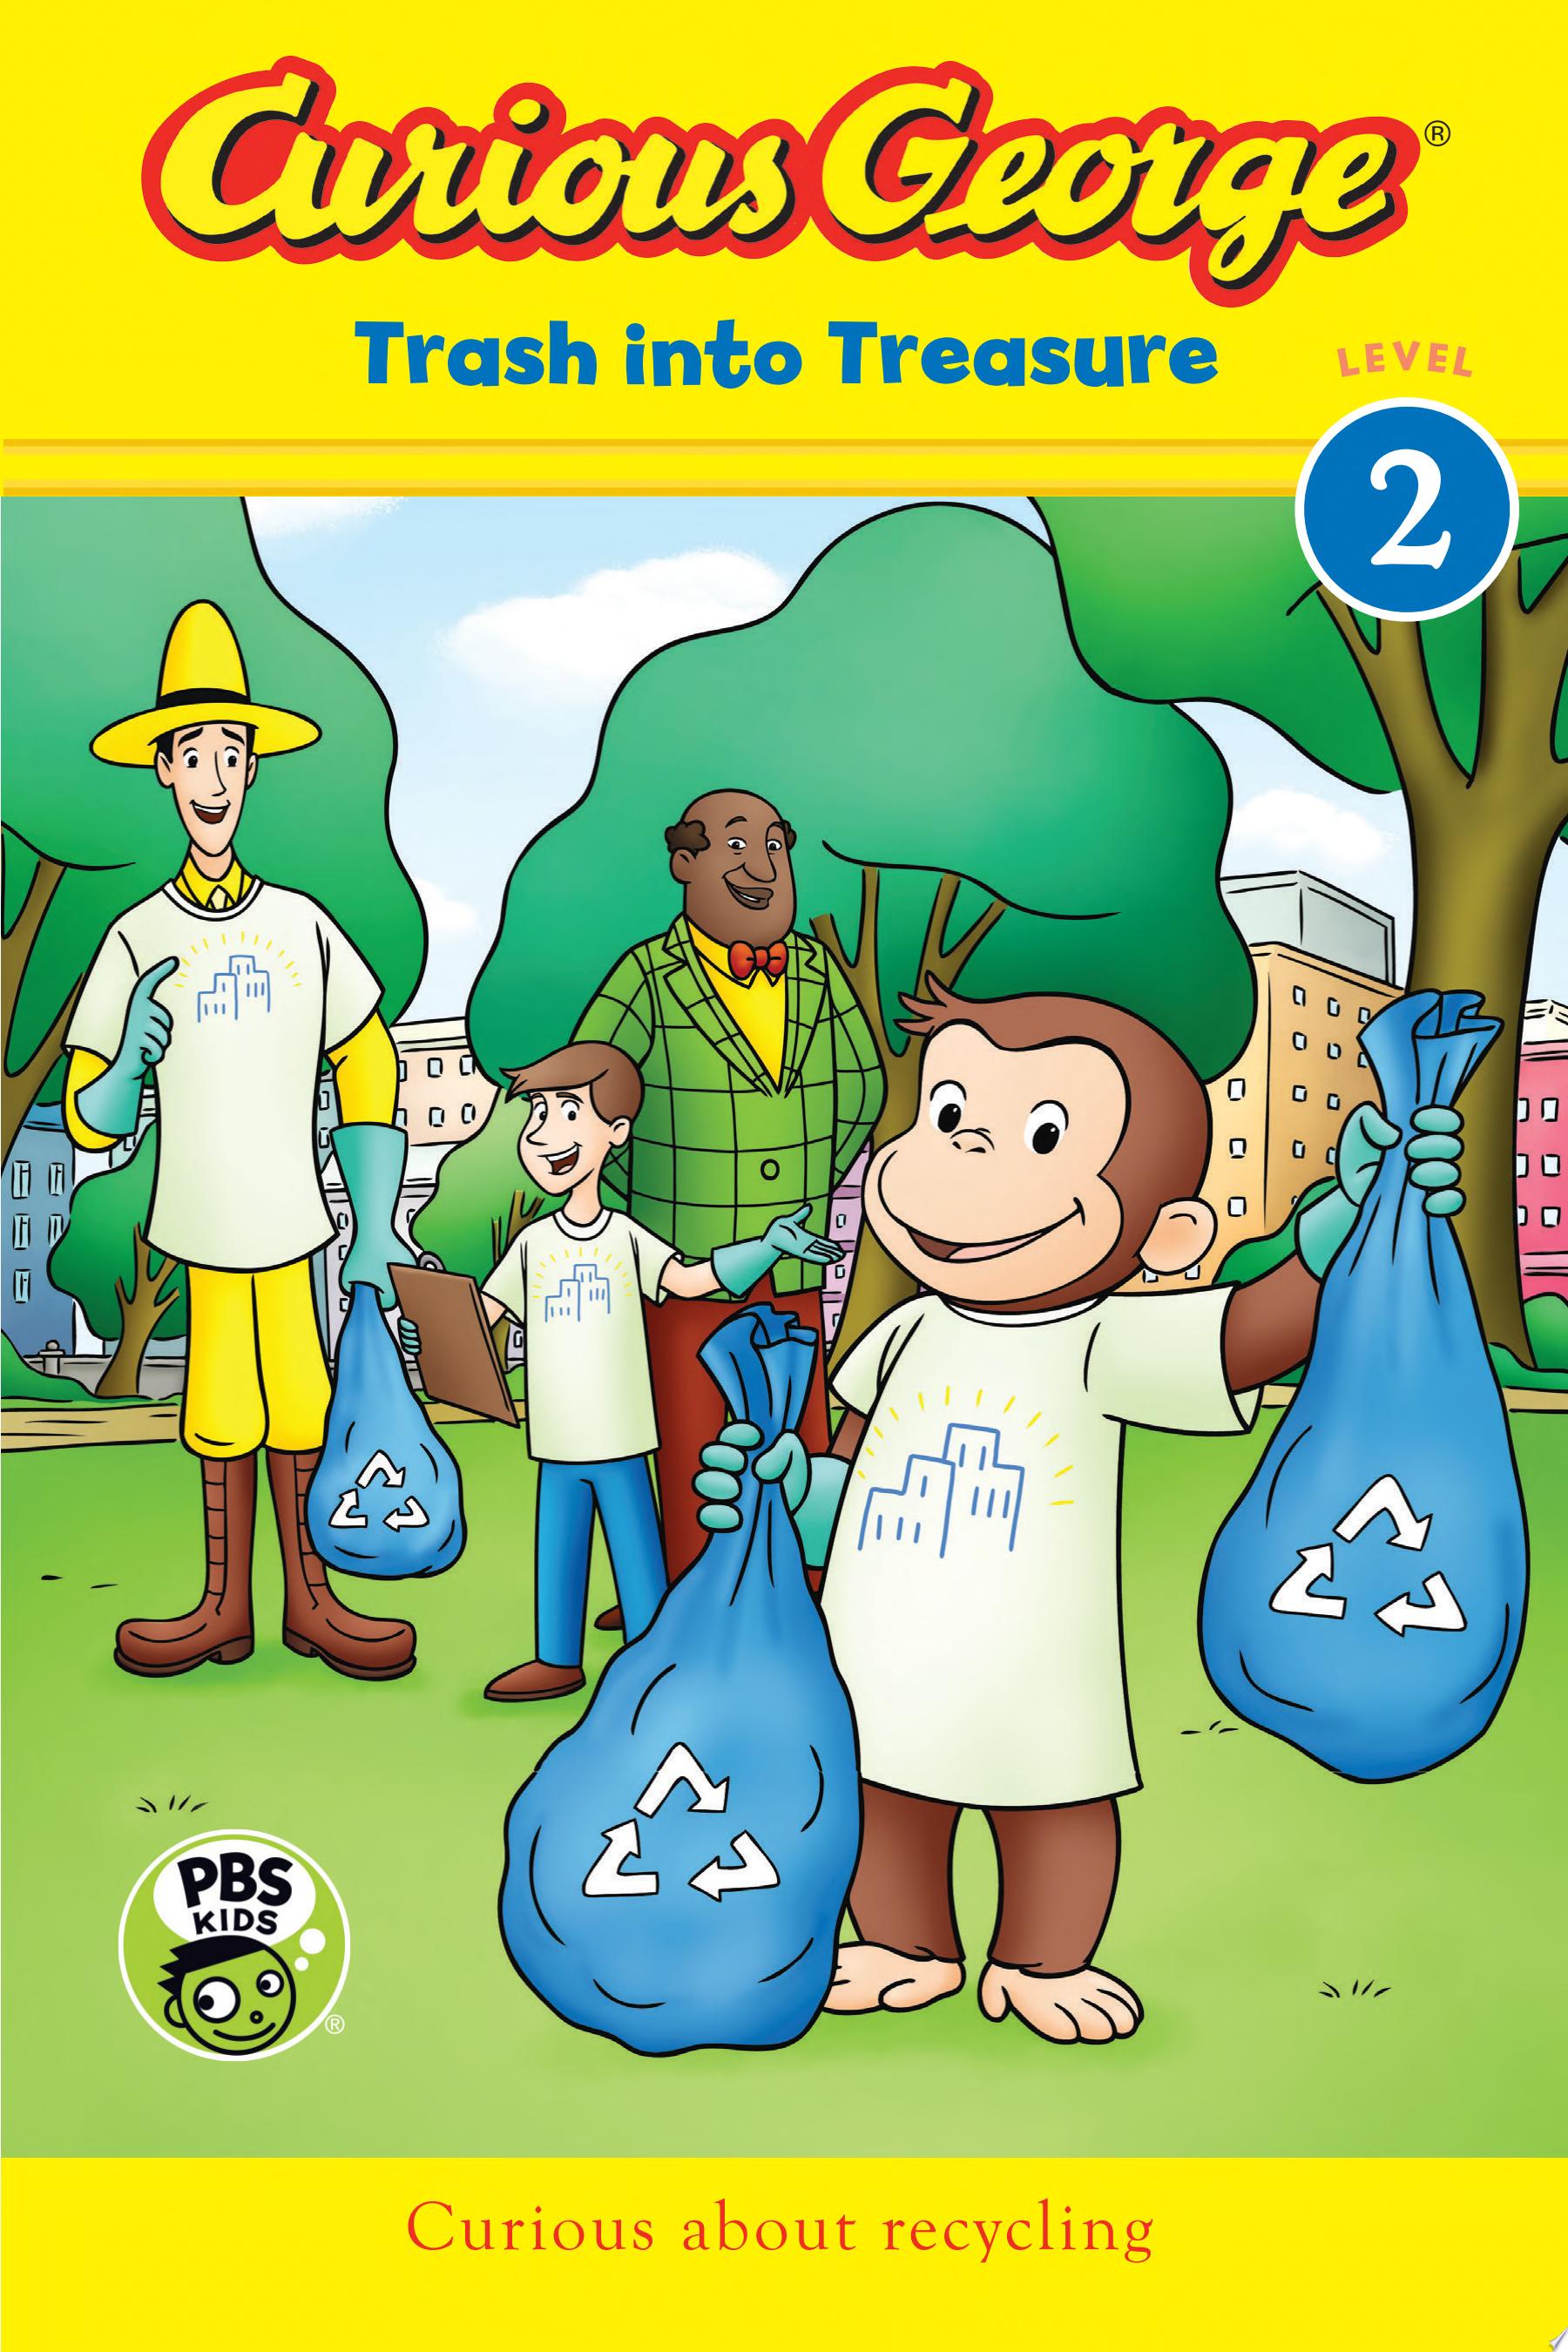 Image for "Curious George: Trash Into Treasure"